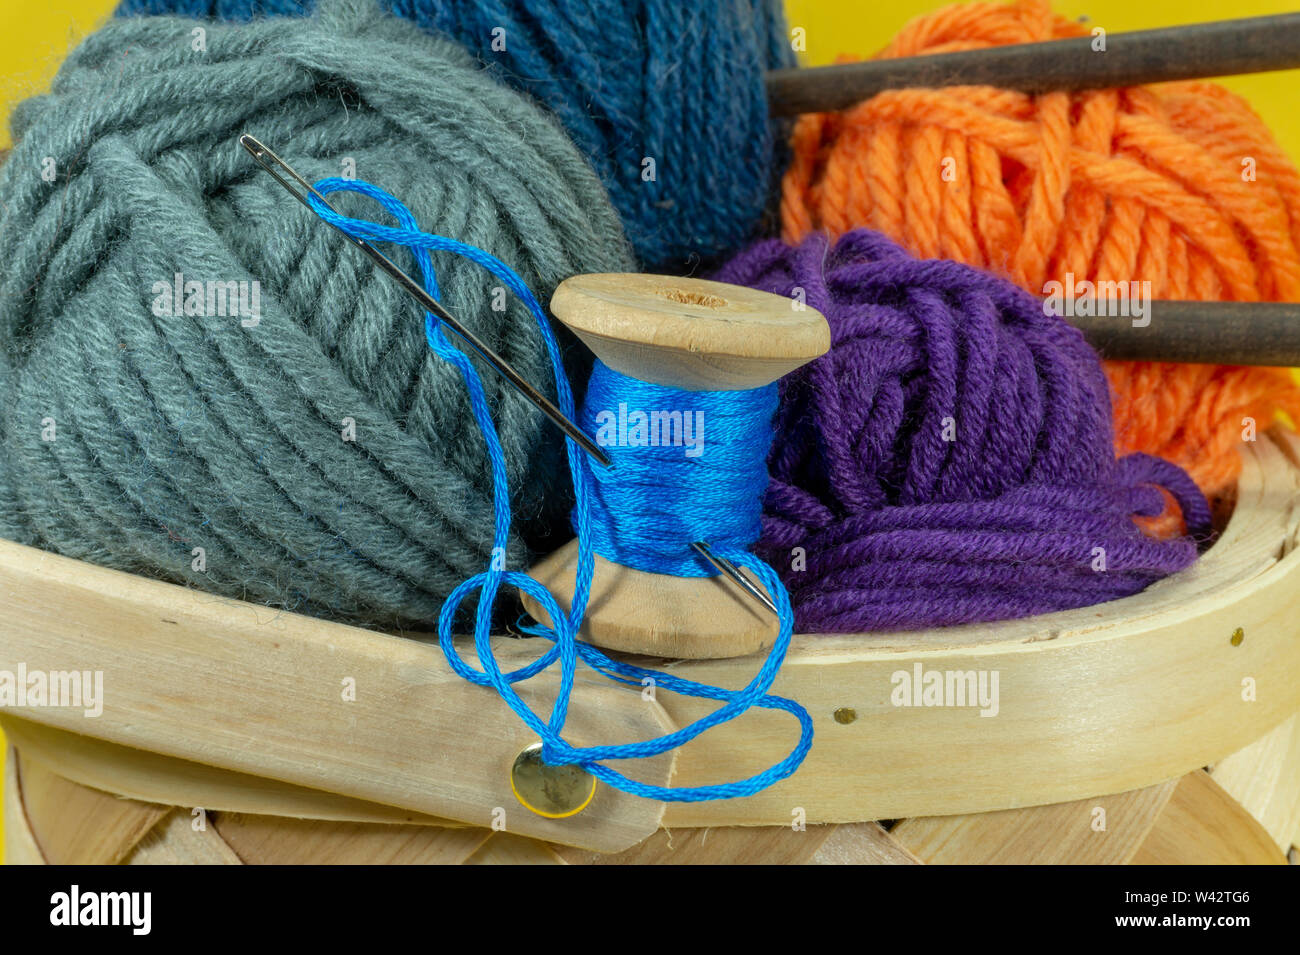 Wool Clews With Knitting Needles Woolen Roll Balls Skein Threads Stock  Photo, Picture and Royalty Free Image. Image 40010256.